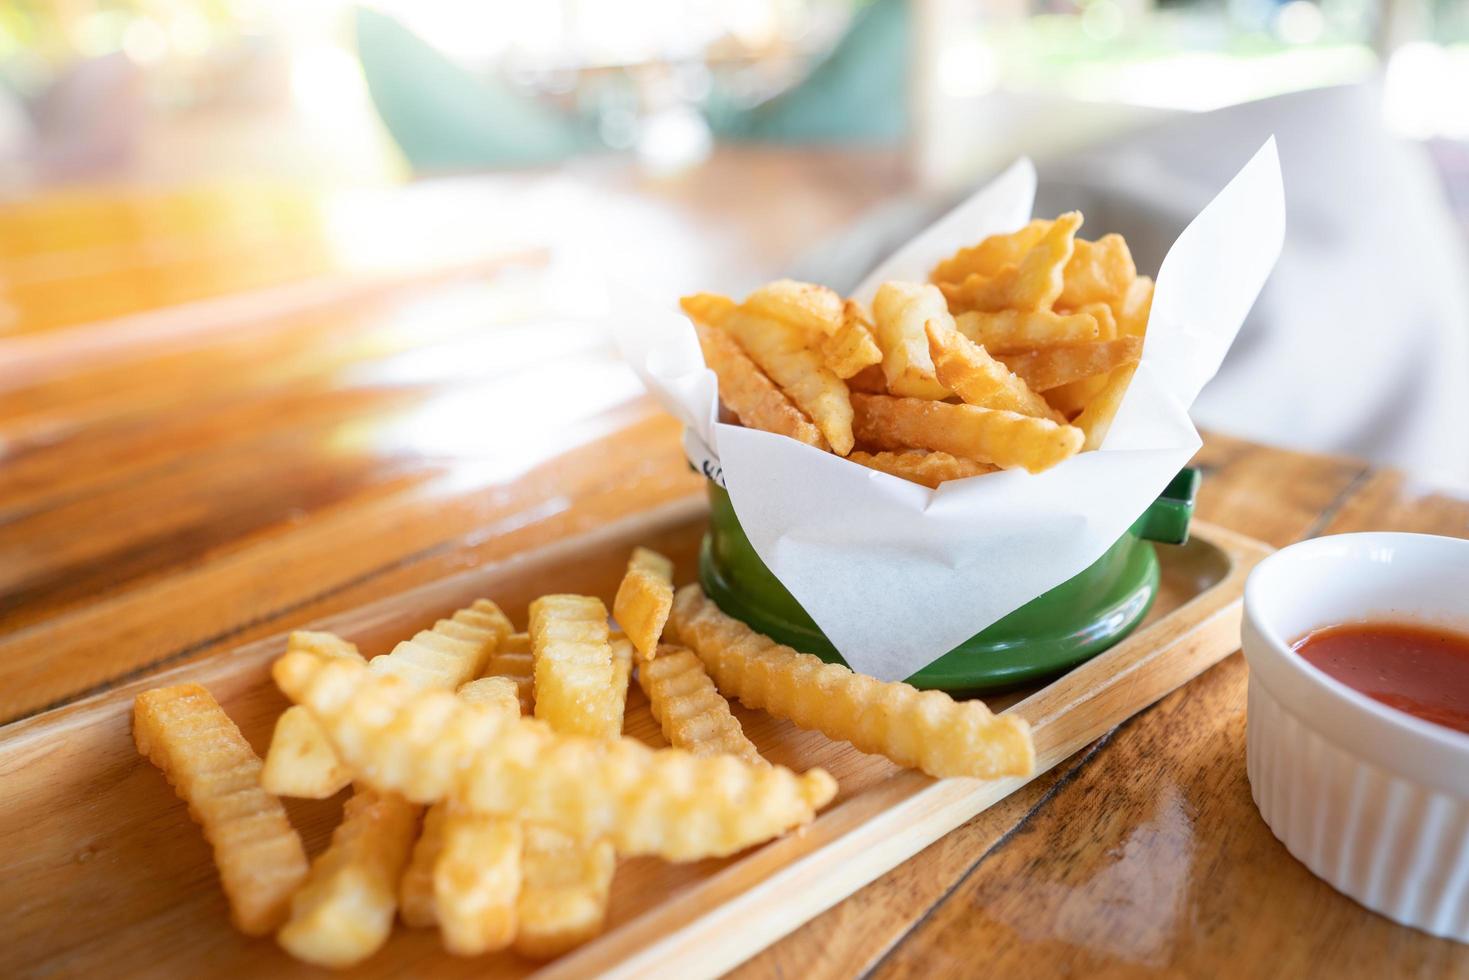 French fries in a green enamel container, on a Thai wooden table photo